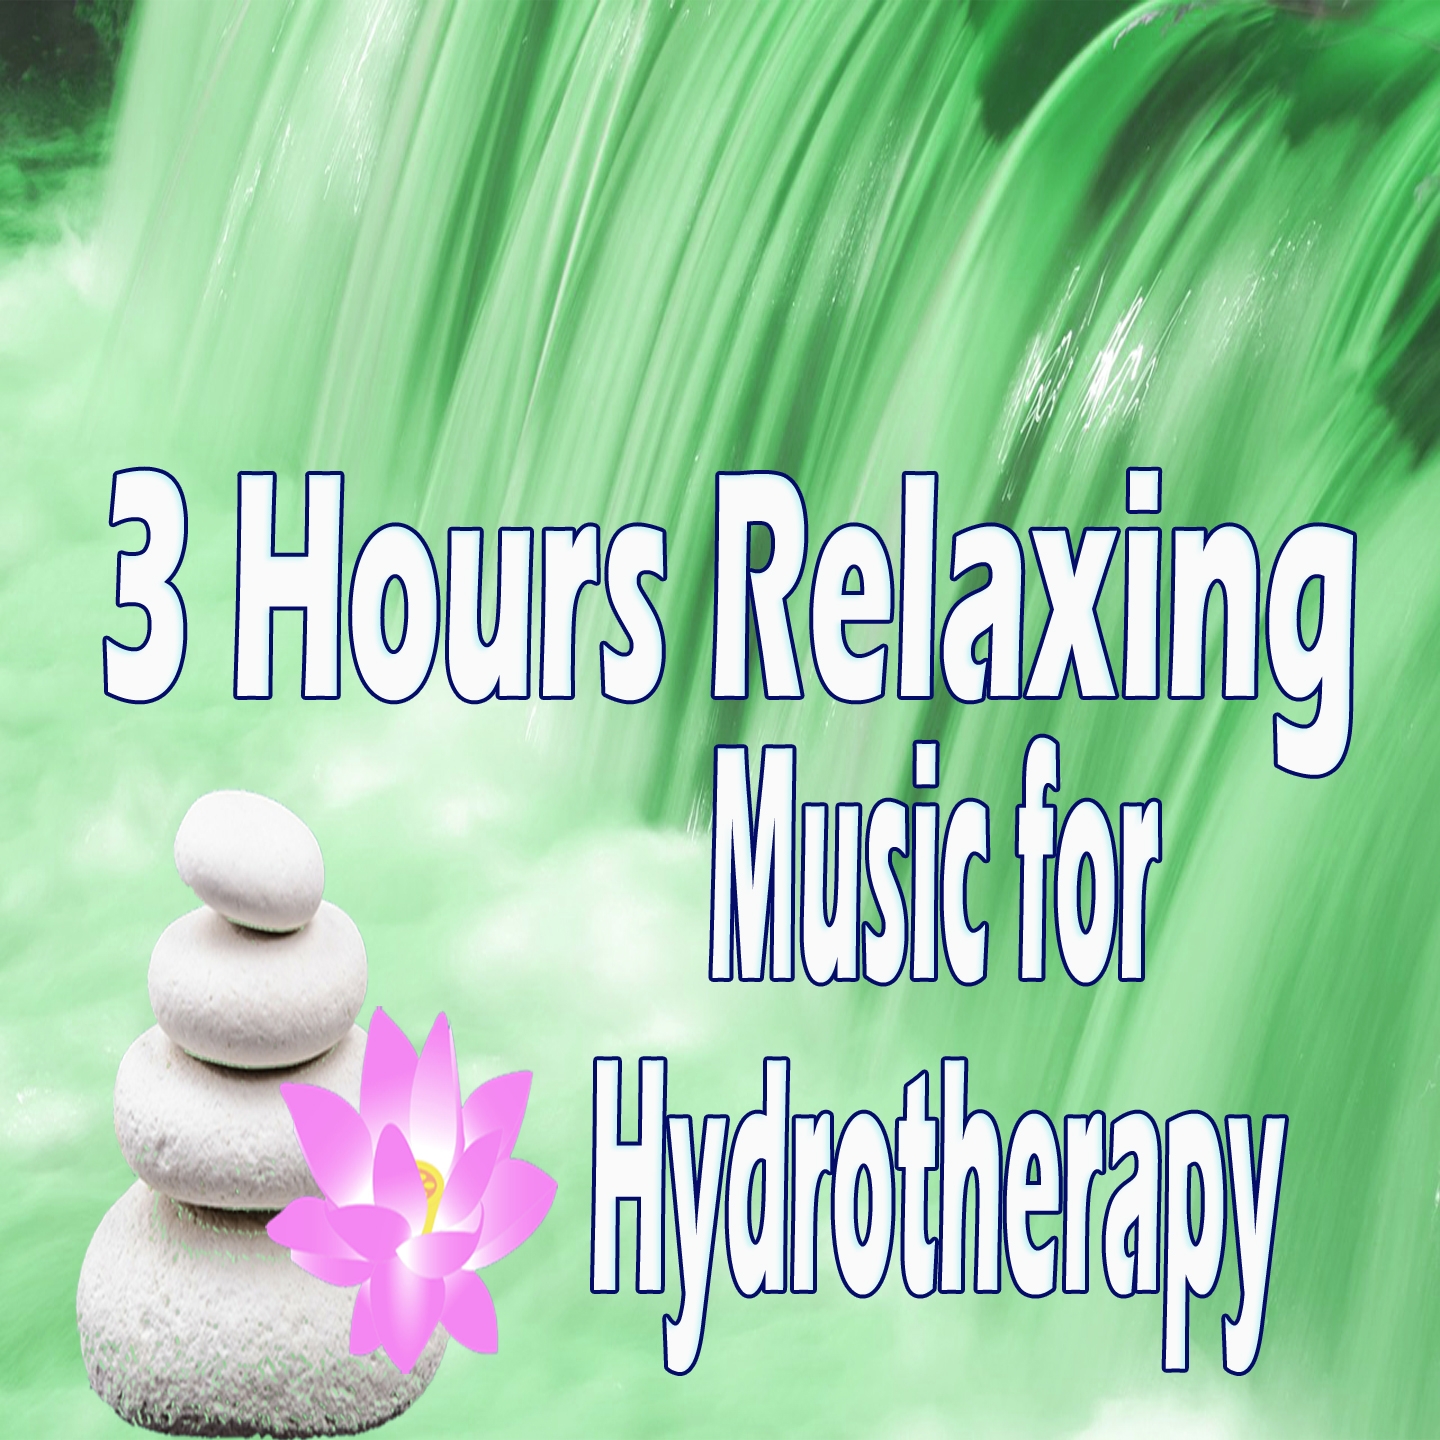 3 Hours Relaxing Music for Hydrotherapy